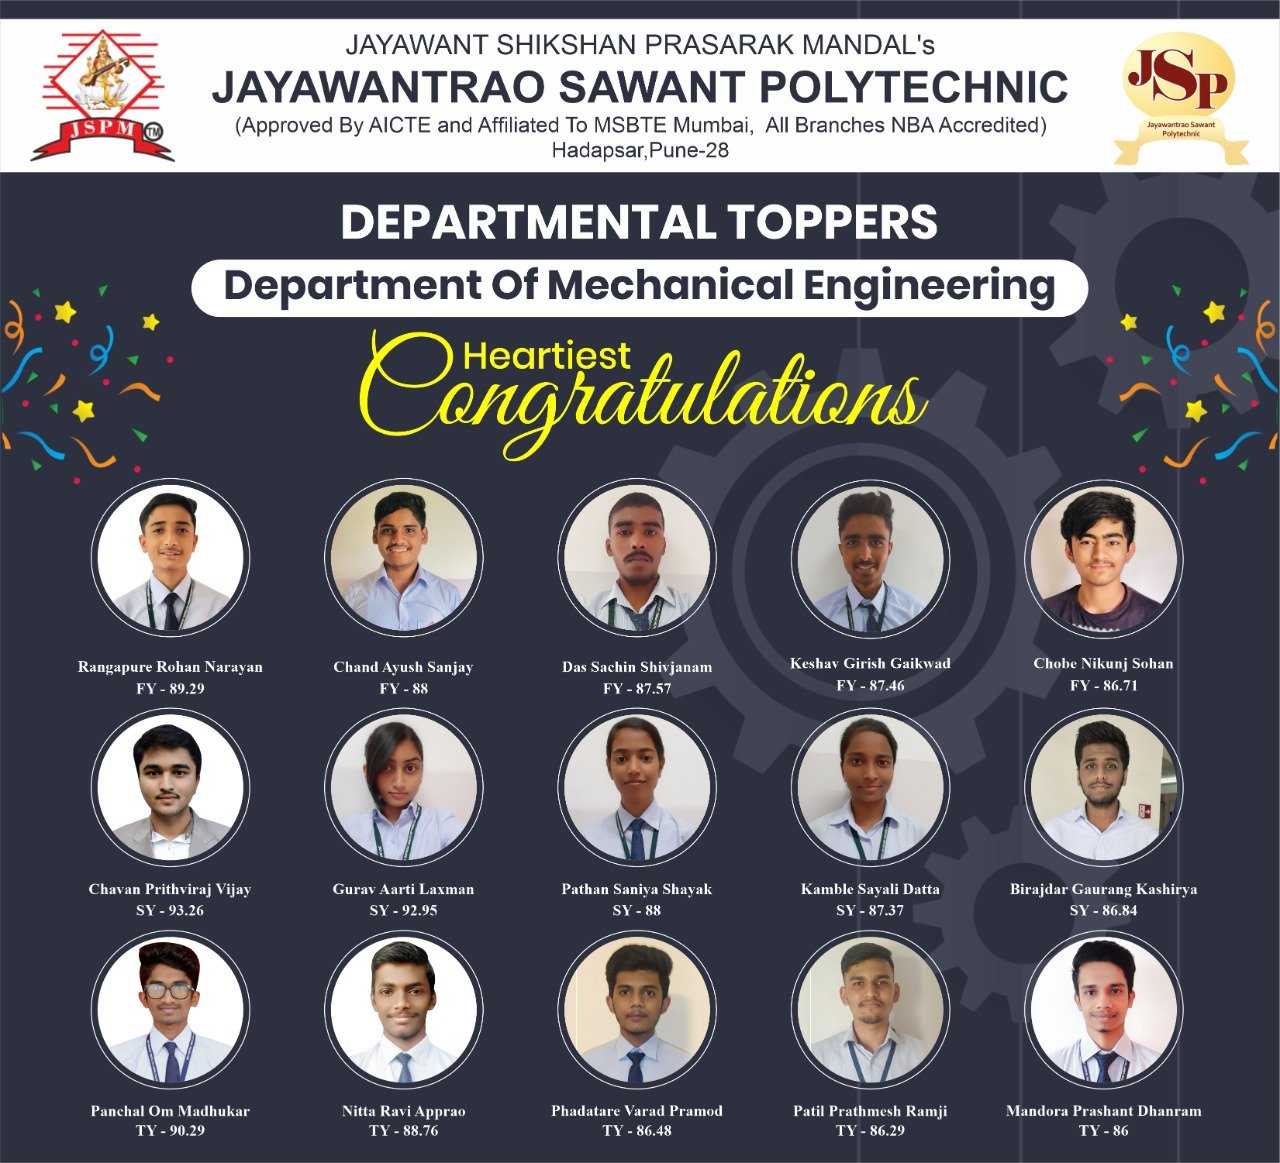 Department Toppers